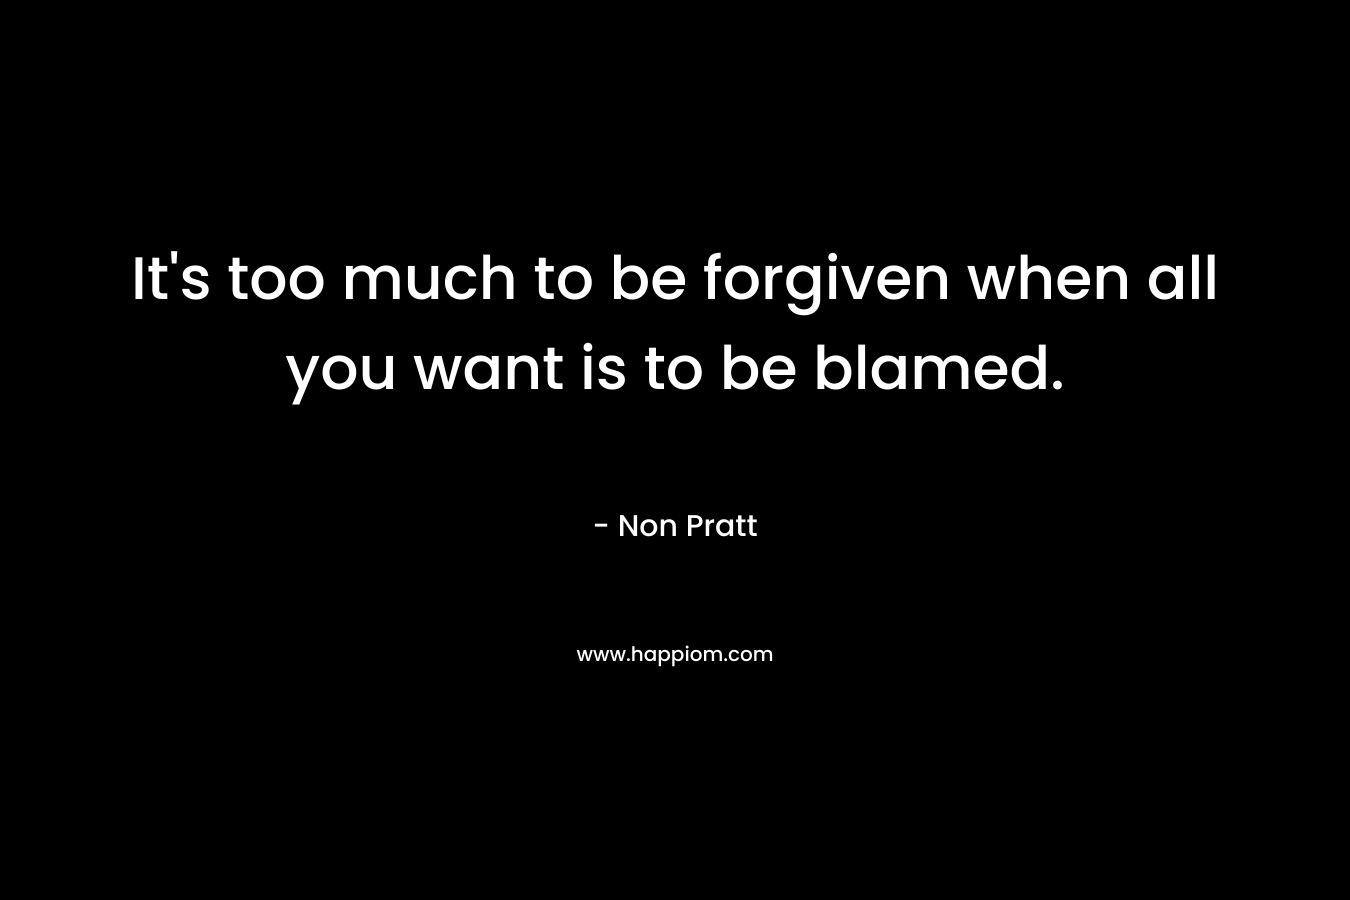 It's too much to be forgiven when all you want is to be blamed.